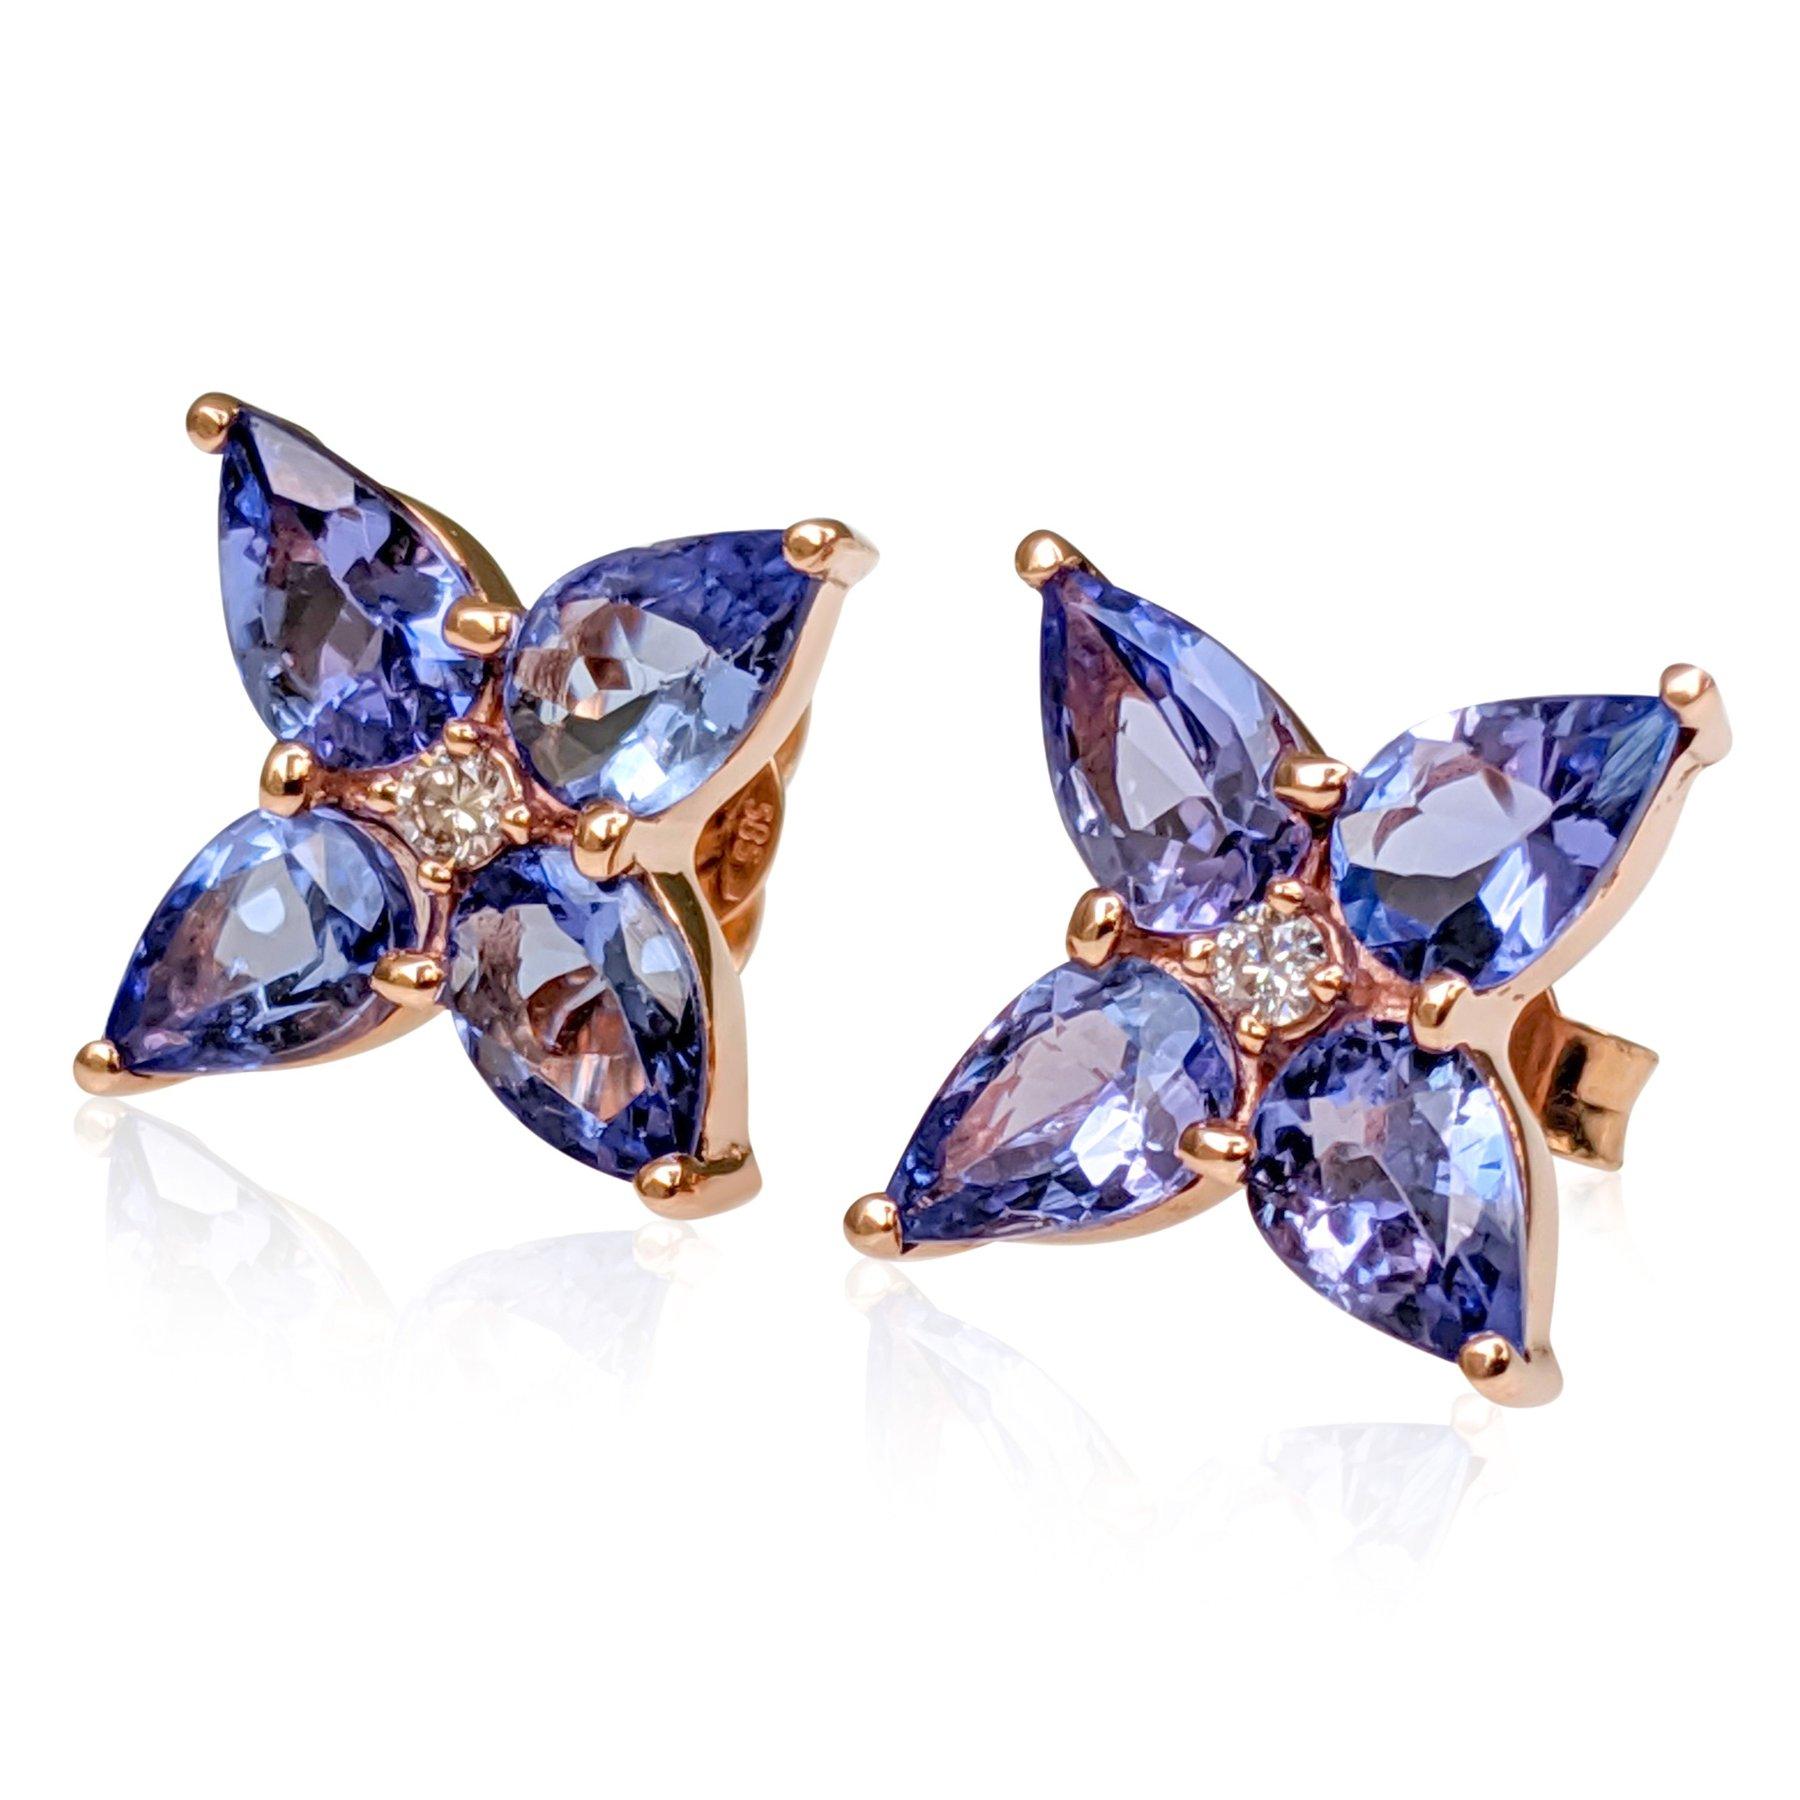 Pear Cut NO RESERVE! 2.78Ct Tanzanite and 0.02Ct Diamonds - 14 kt. Pink gold - Earrings For Sale